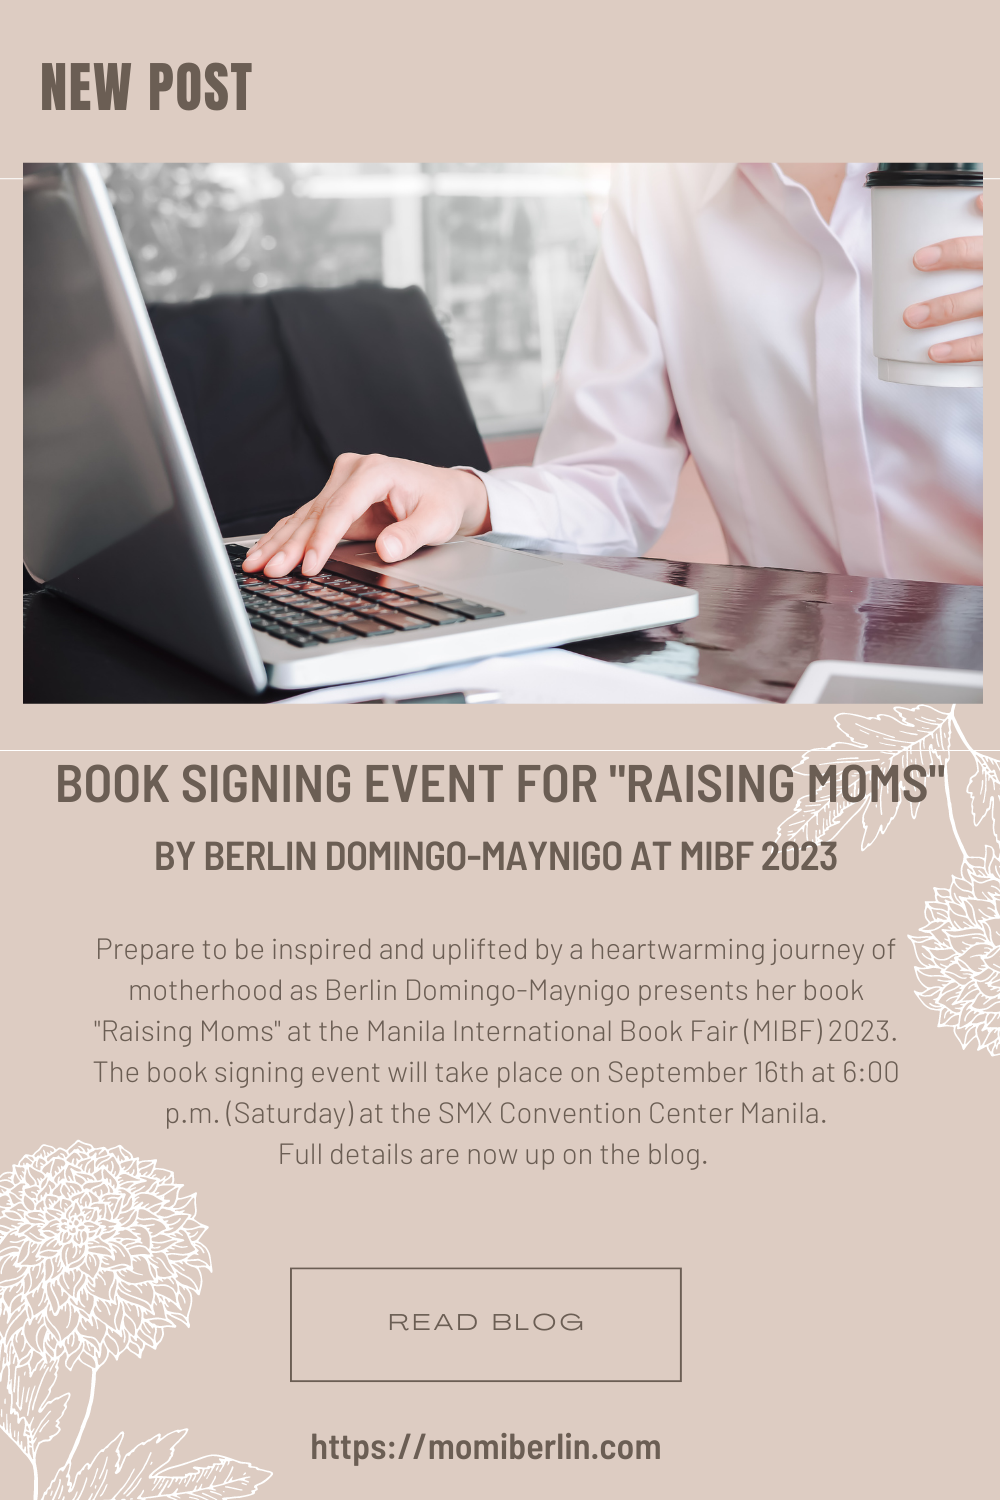 Book Signing Event for "Raising Moms" by Berlin Domingo-Maynigo at MIBF 2023